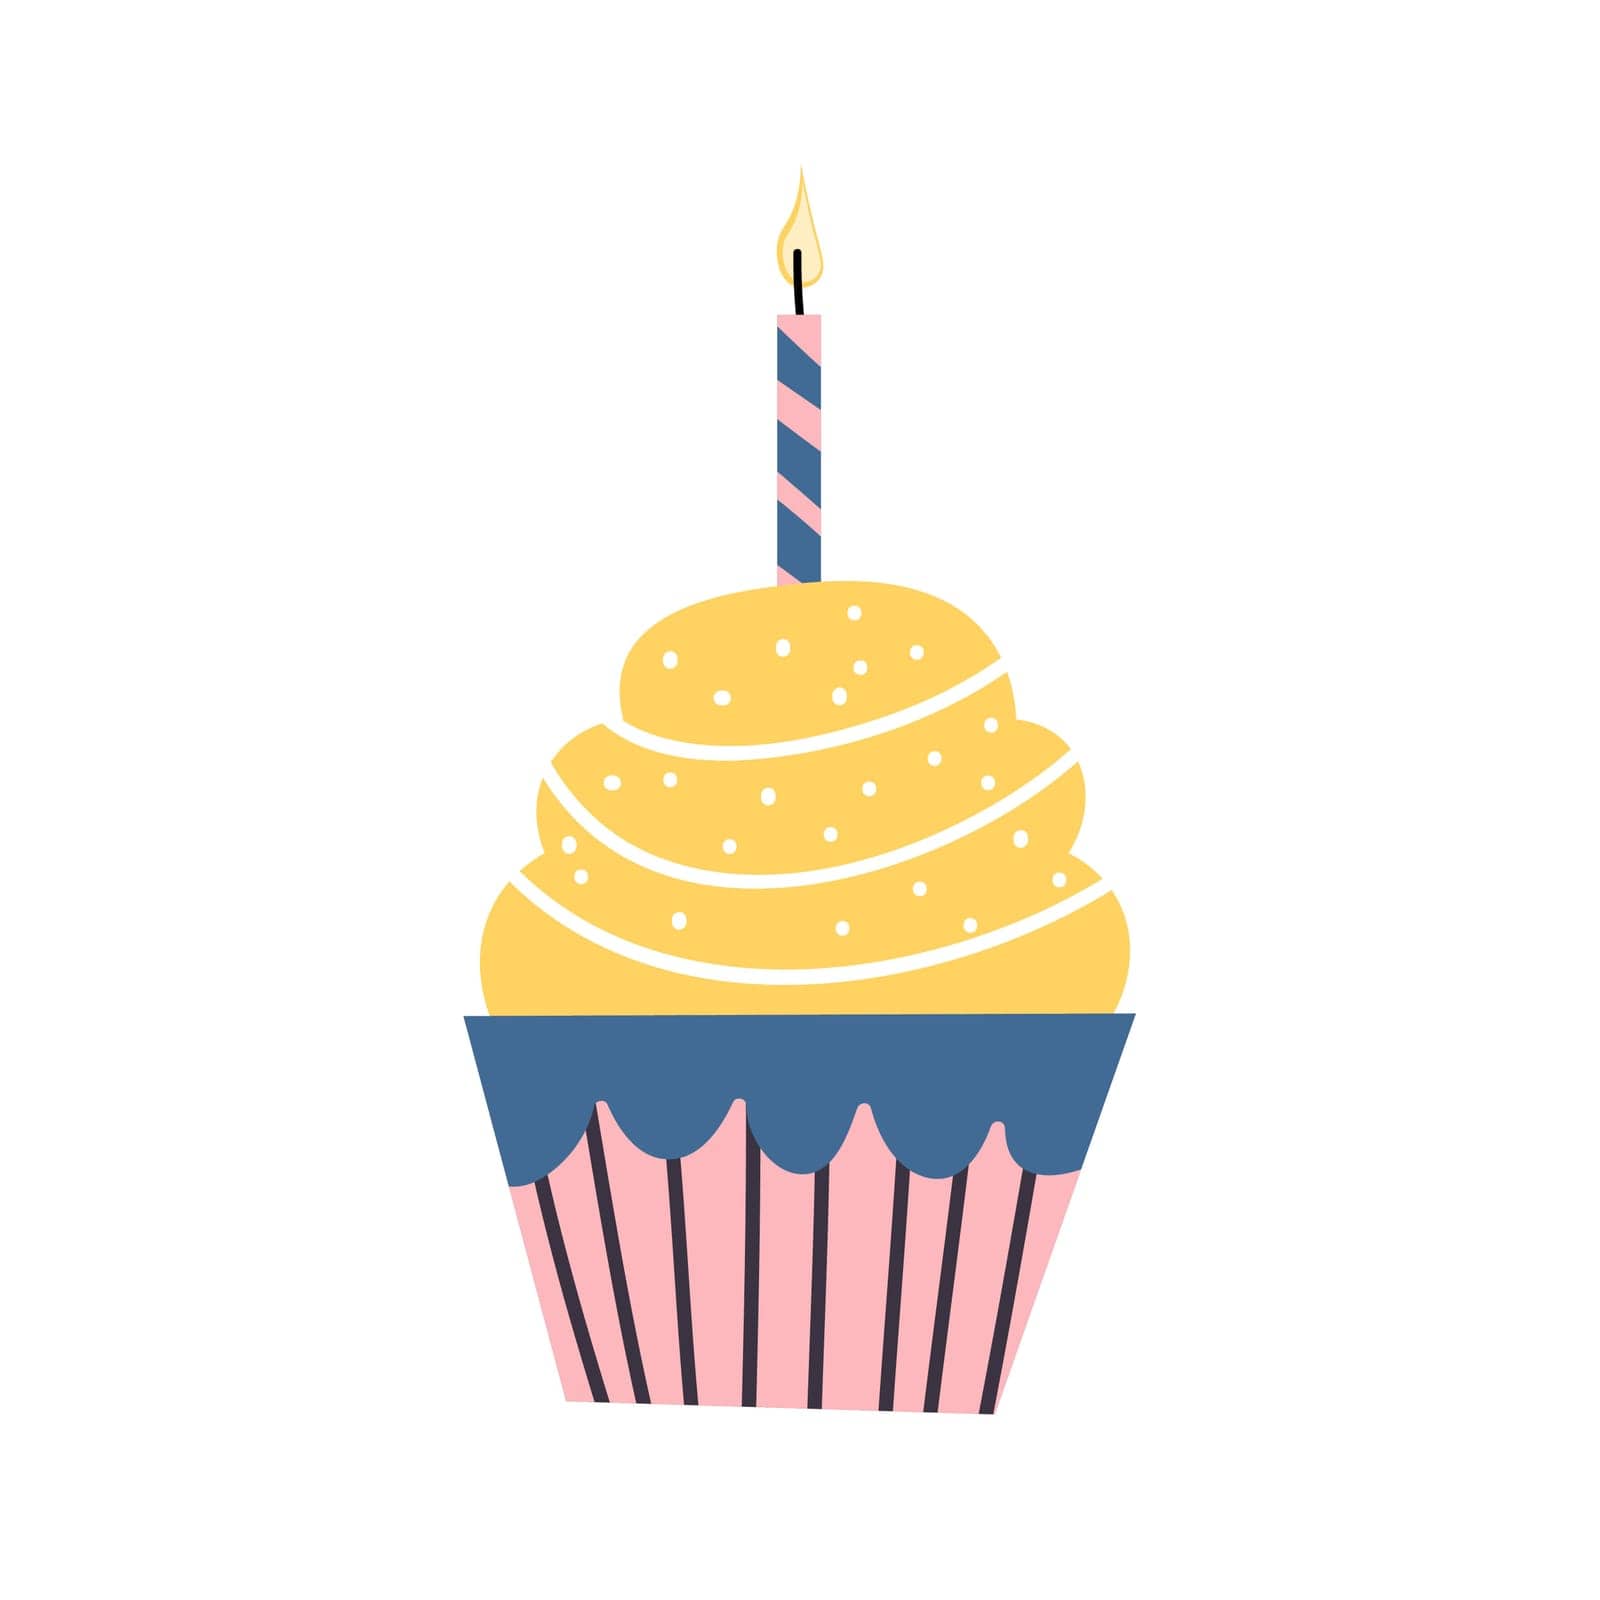 Cupcake with a candle on a birthday, flat. Vector illustration. EPS by Alxyzt